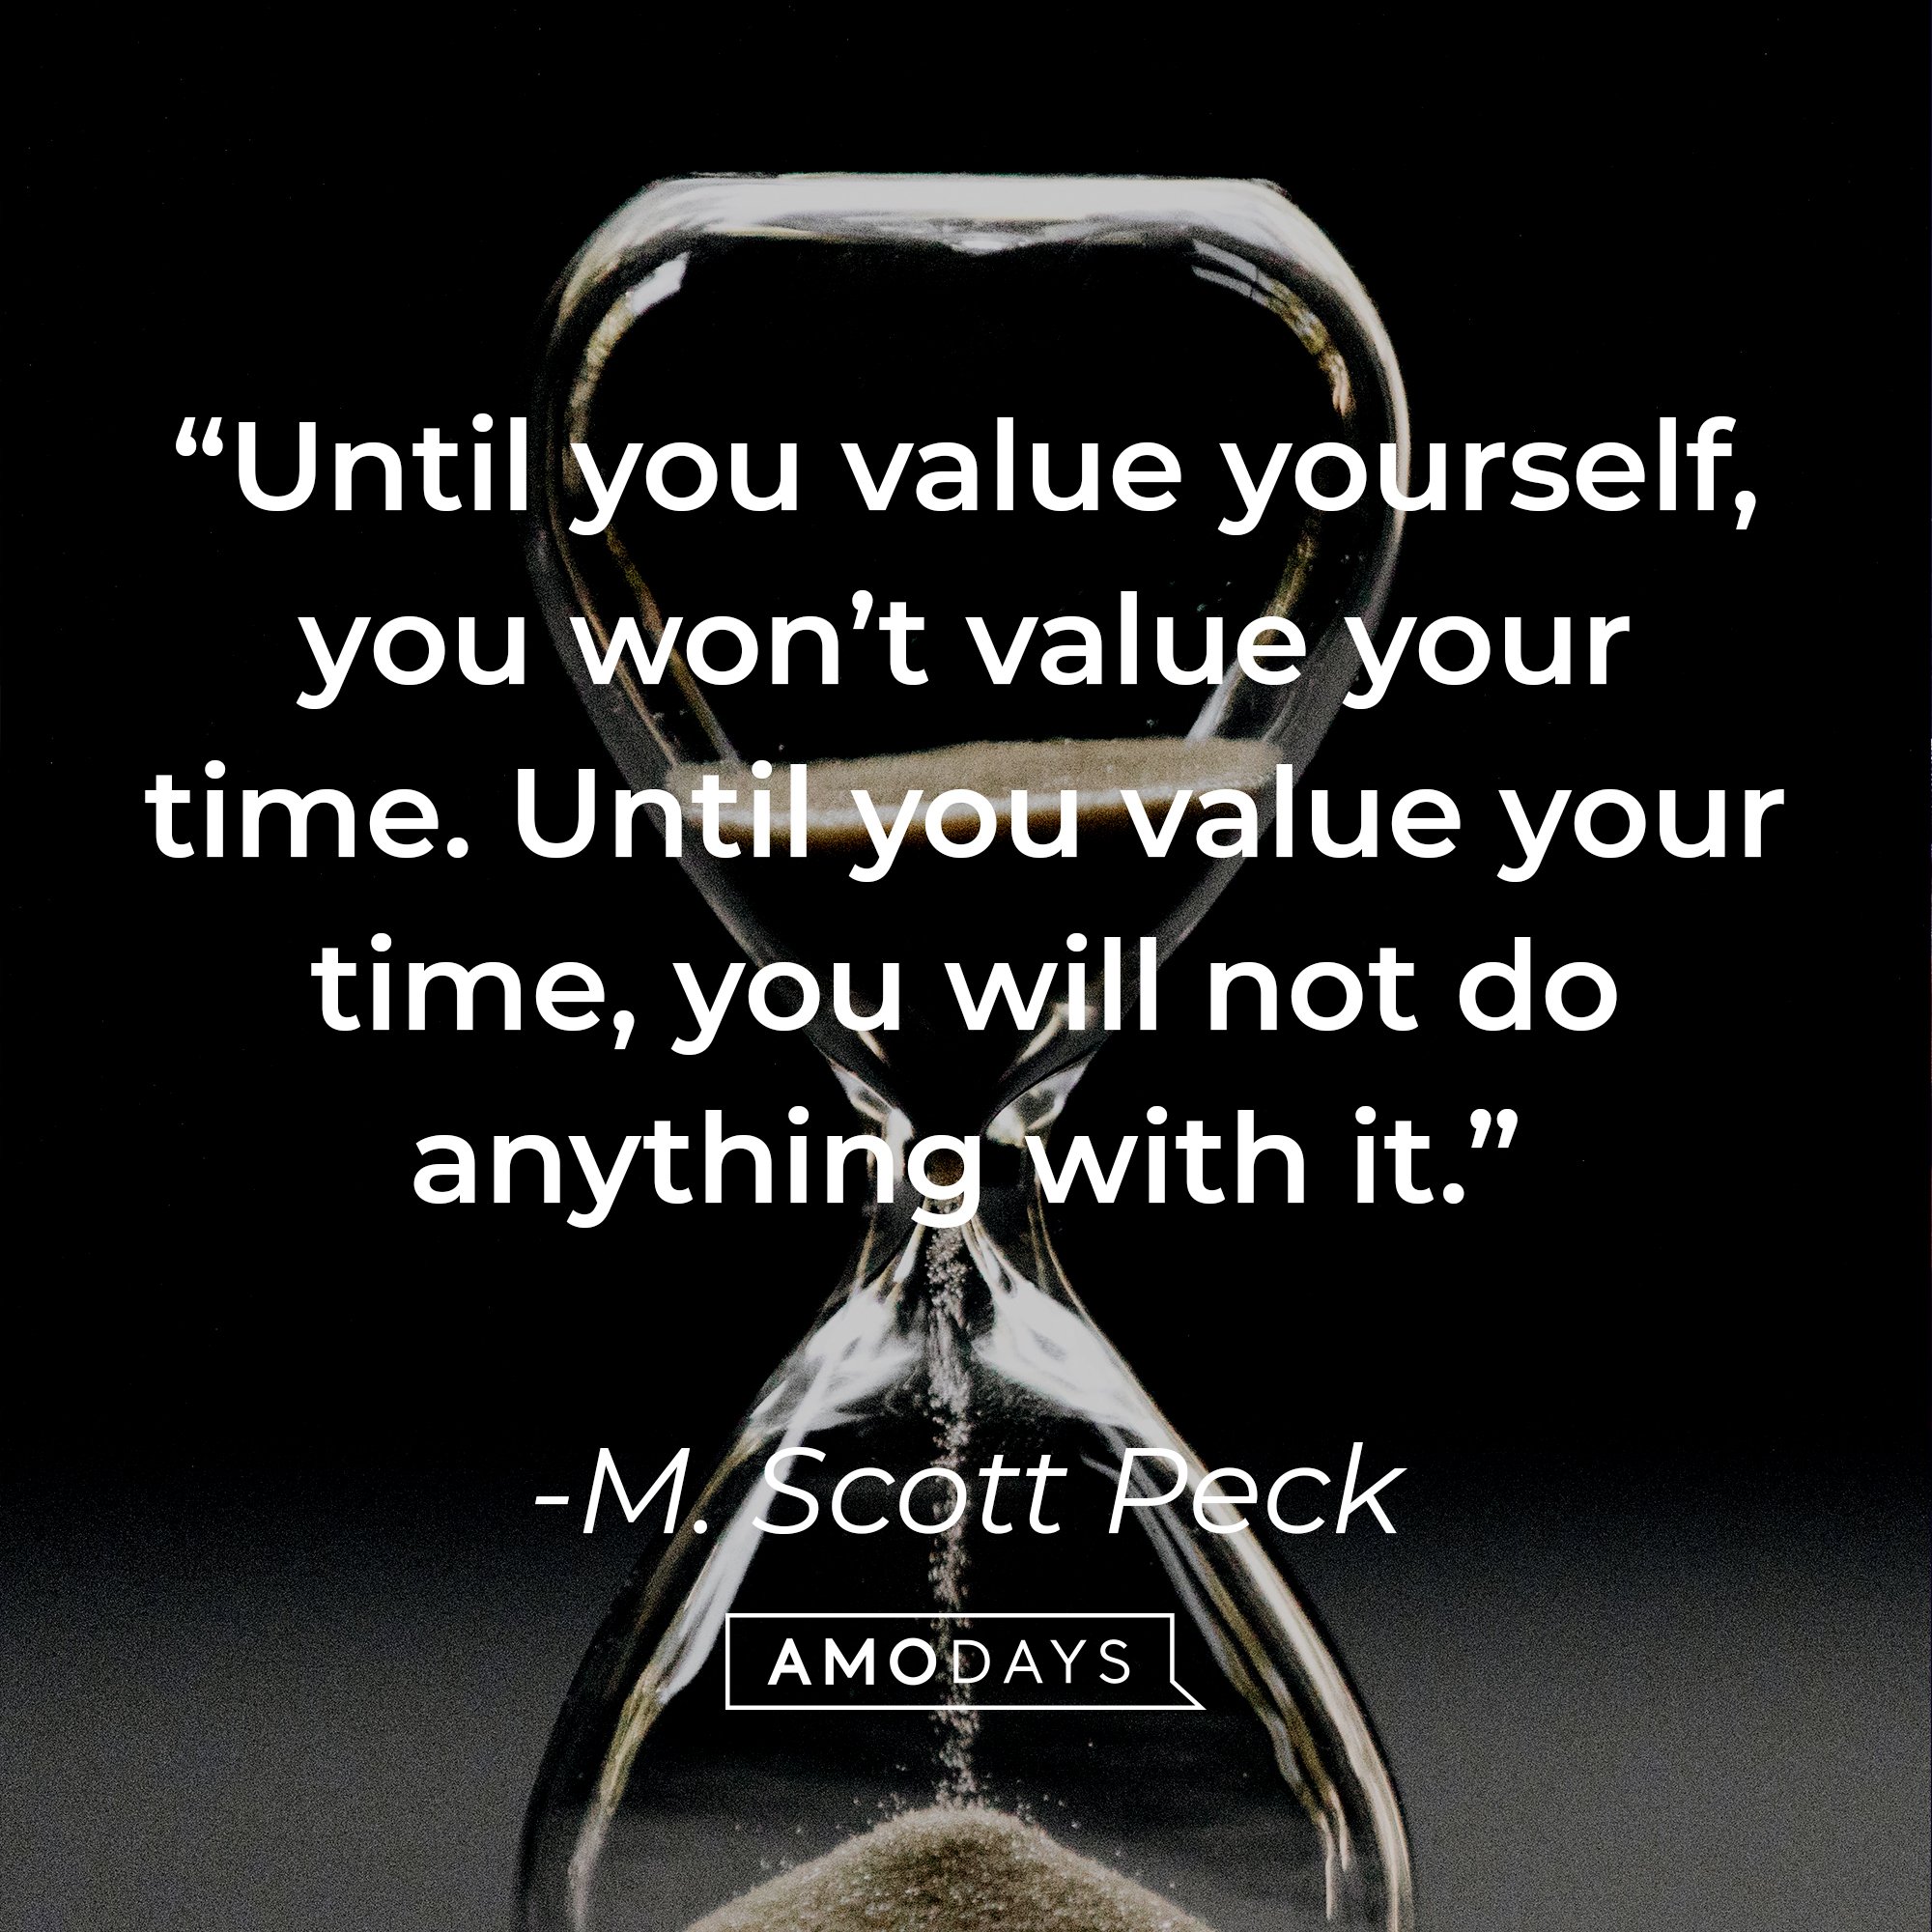  M. Scott Peck's quote: “Until you value yourself, you won’t value your time. Until you value your time, you will not do anything with it.” | Image: AmoDays